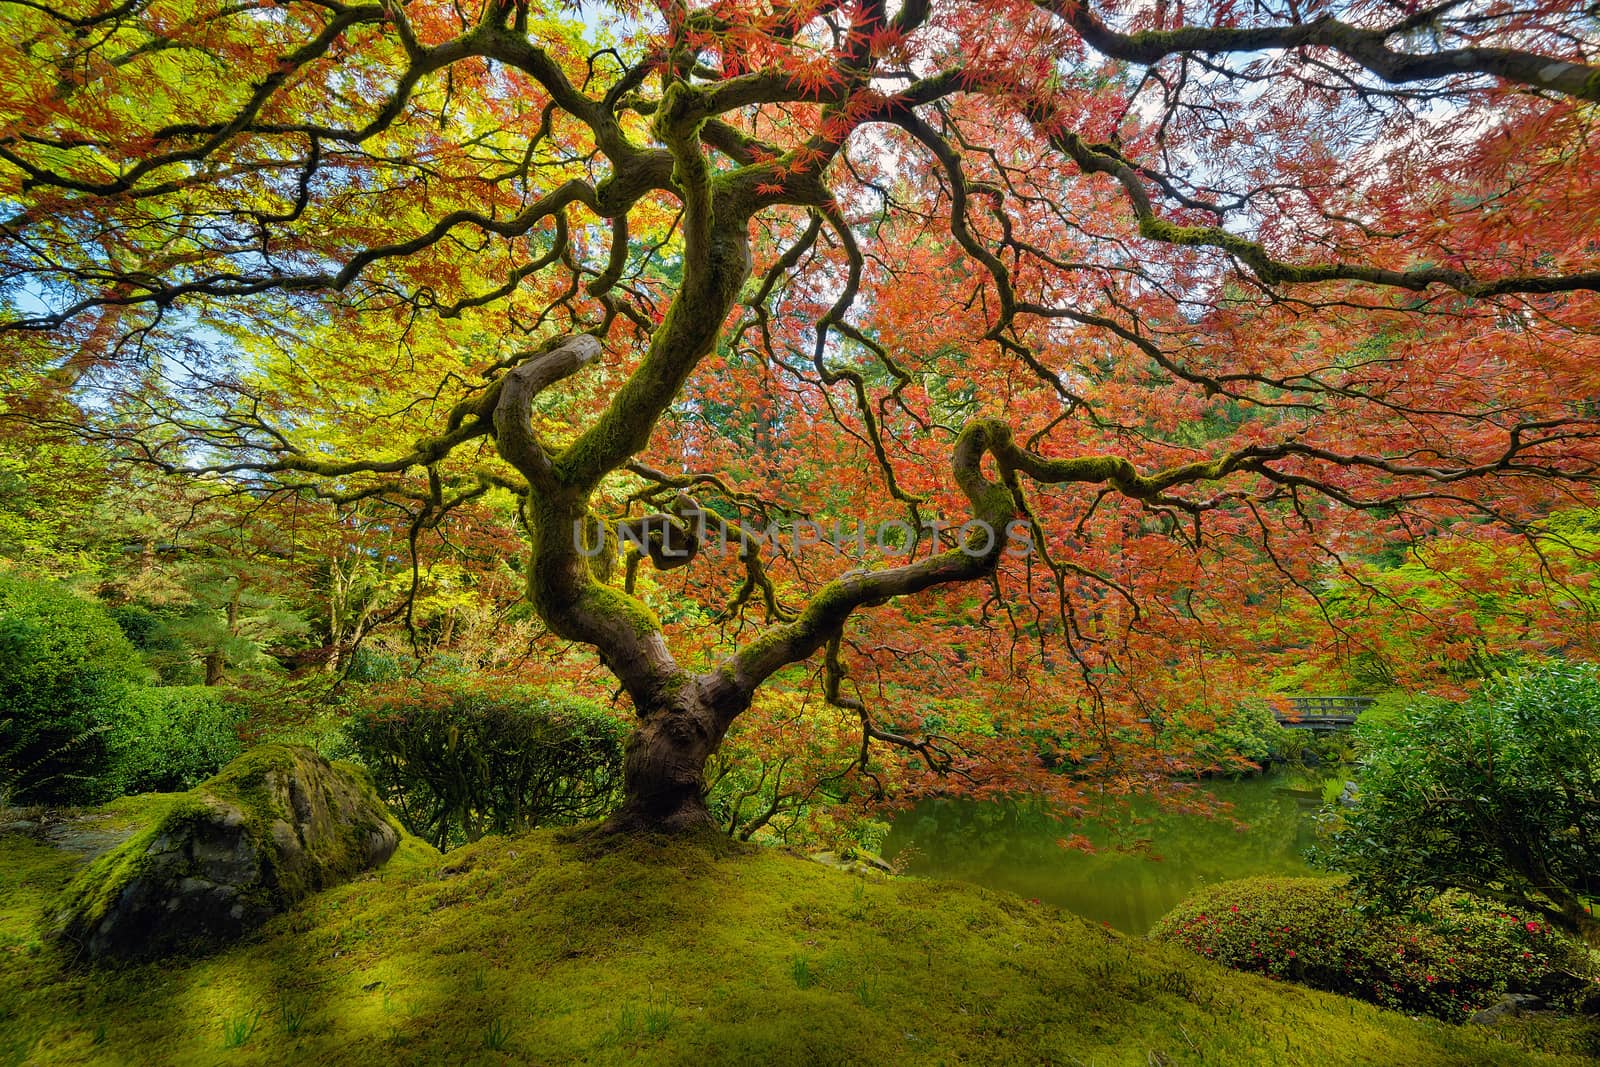 The Japanese Maple Tree in Spring by Davidgn